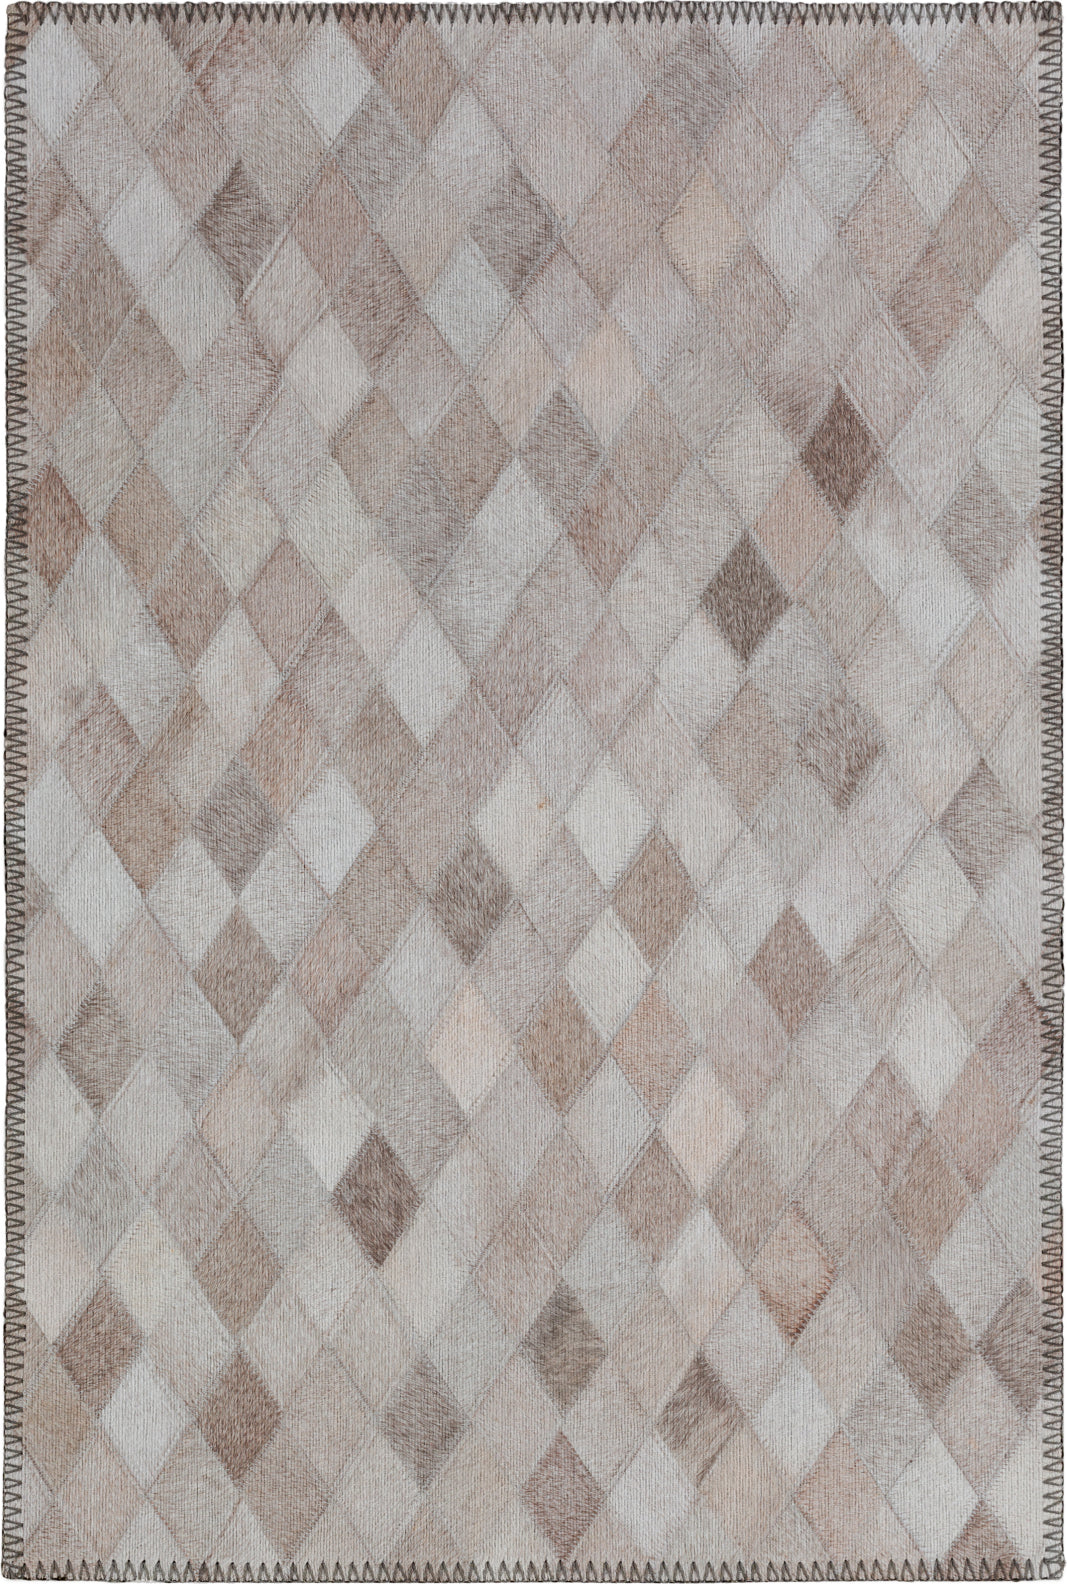 Dalyn Stetson SS6 Flannel Area Rug main image